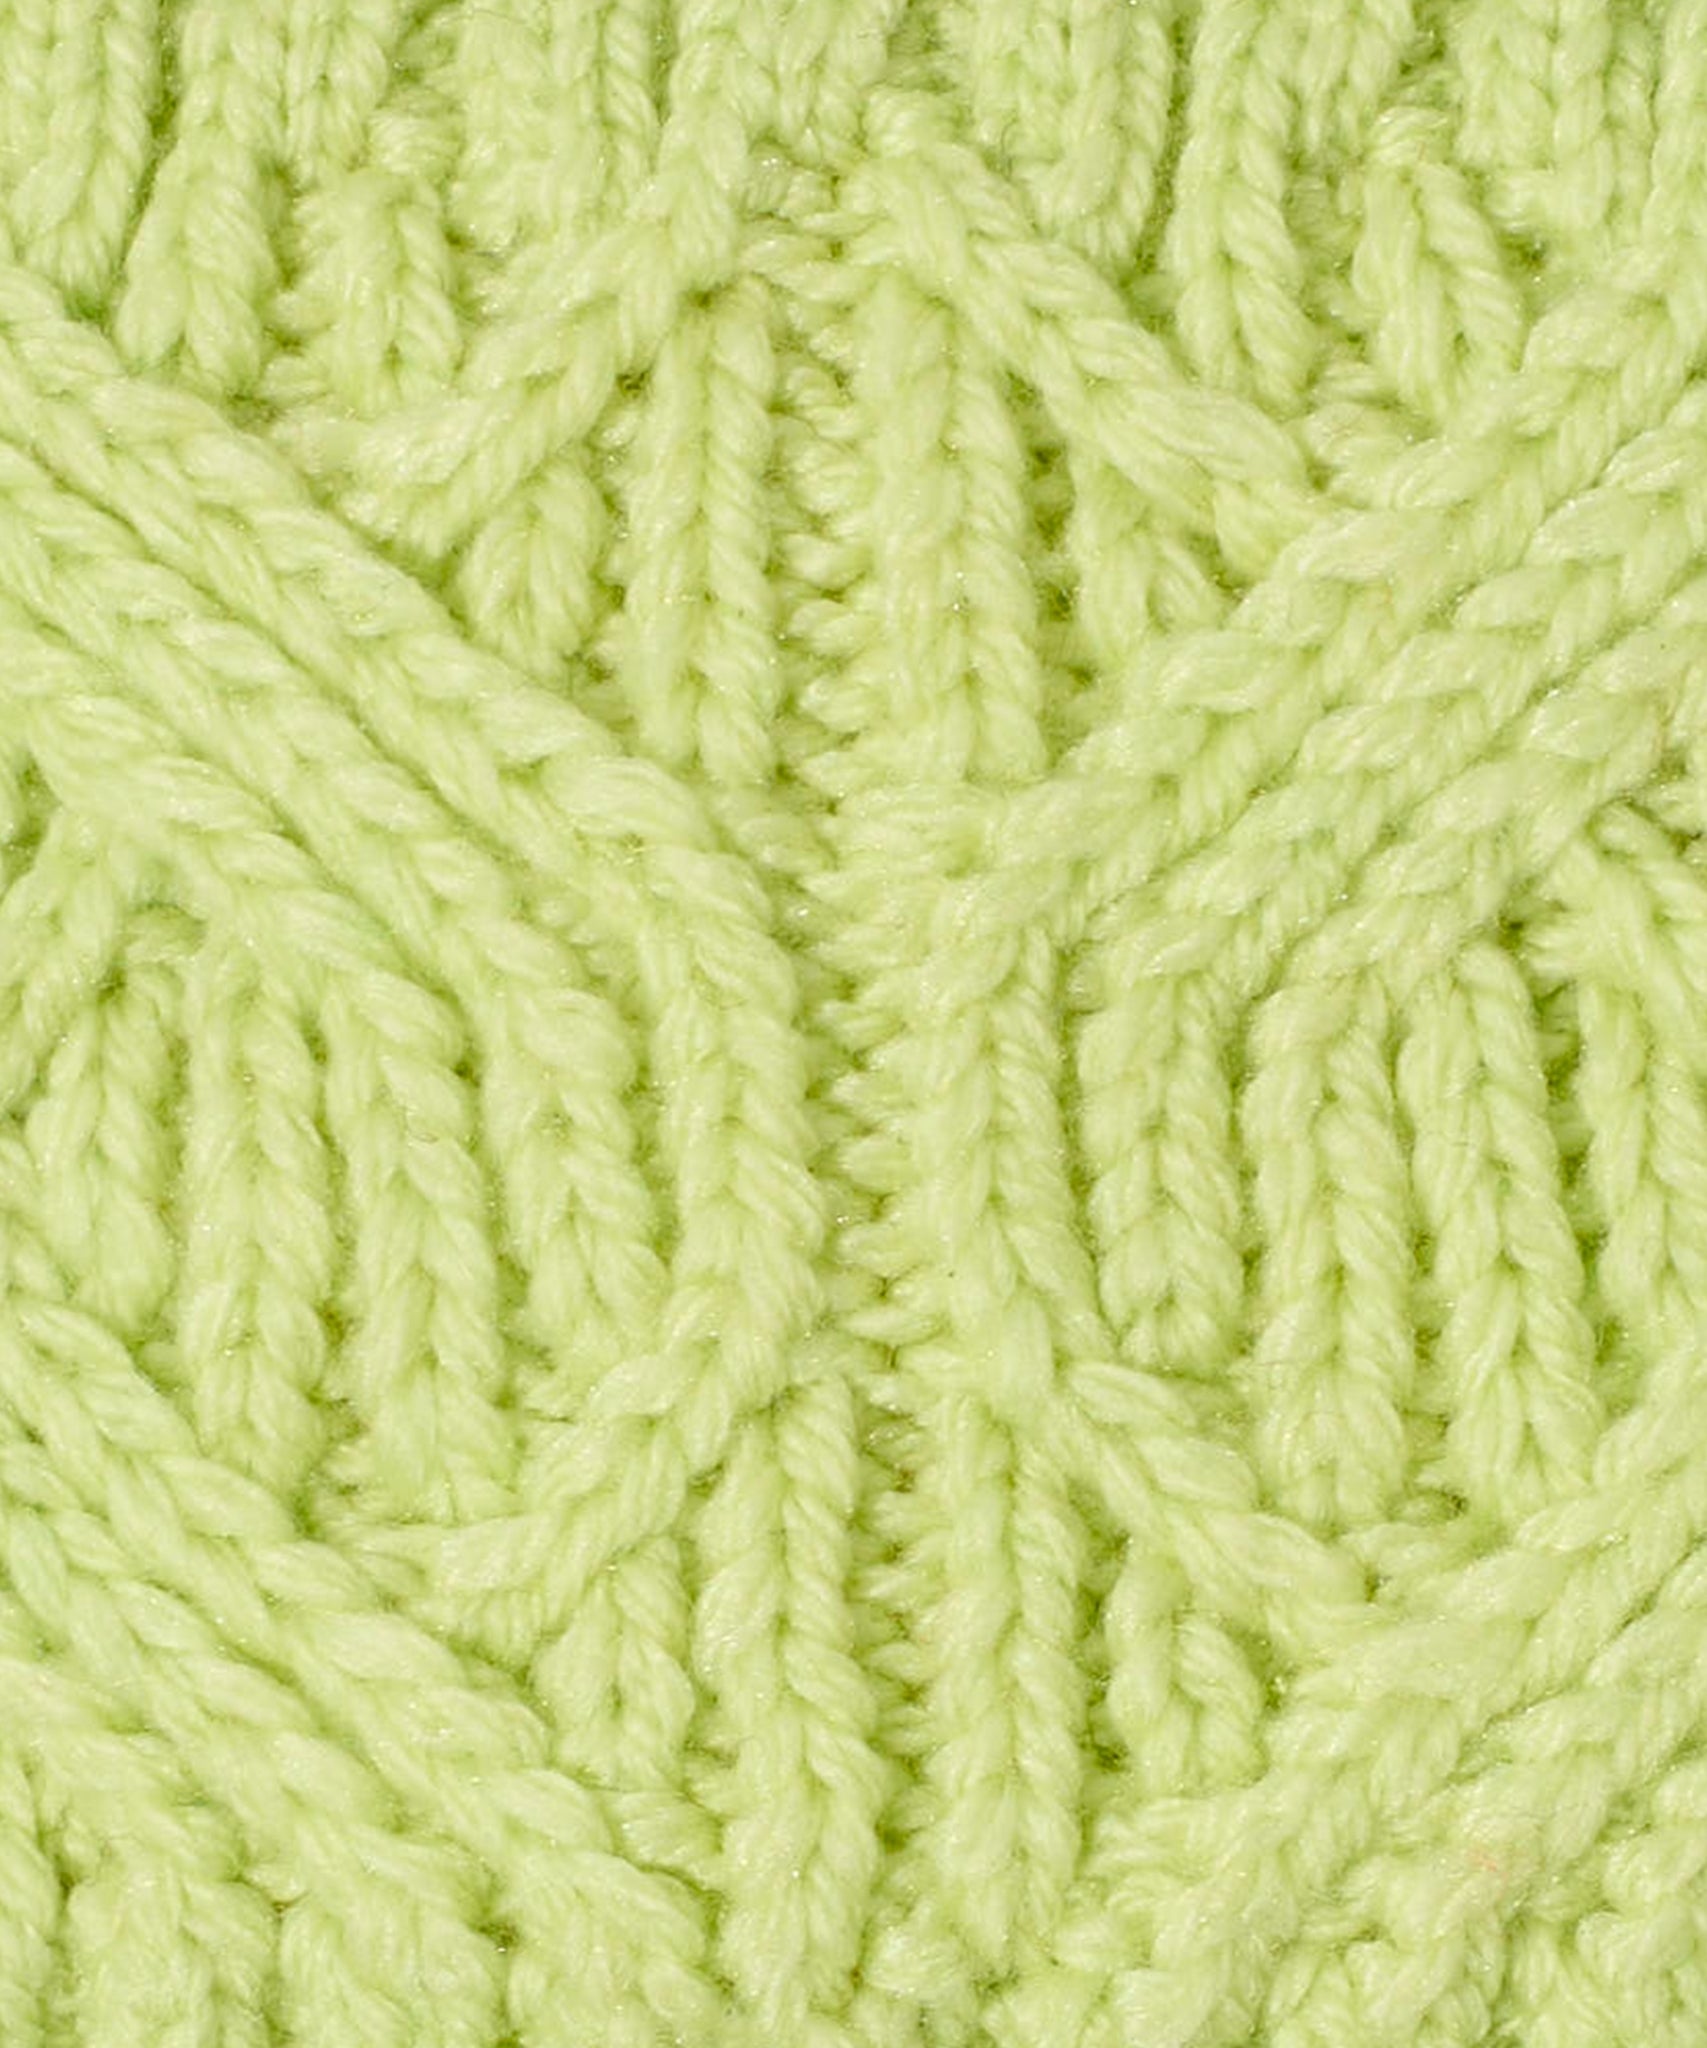 Loopy Cable Headband in color Electric Lime